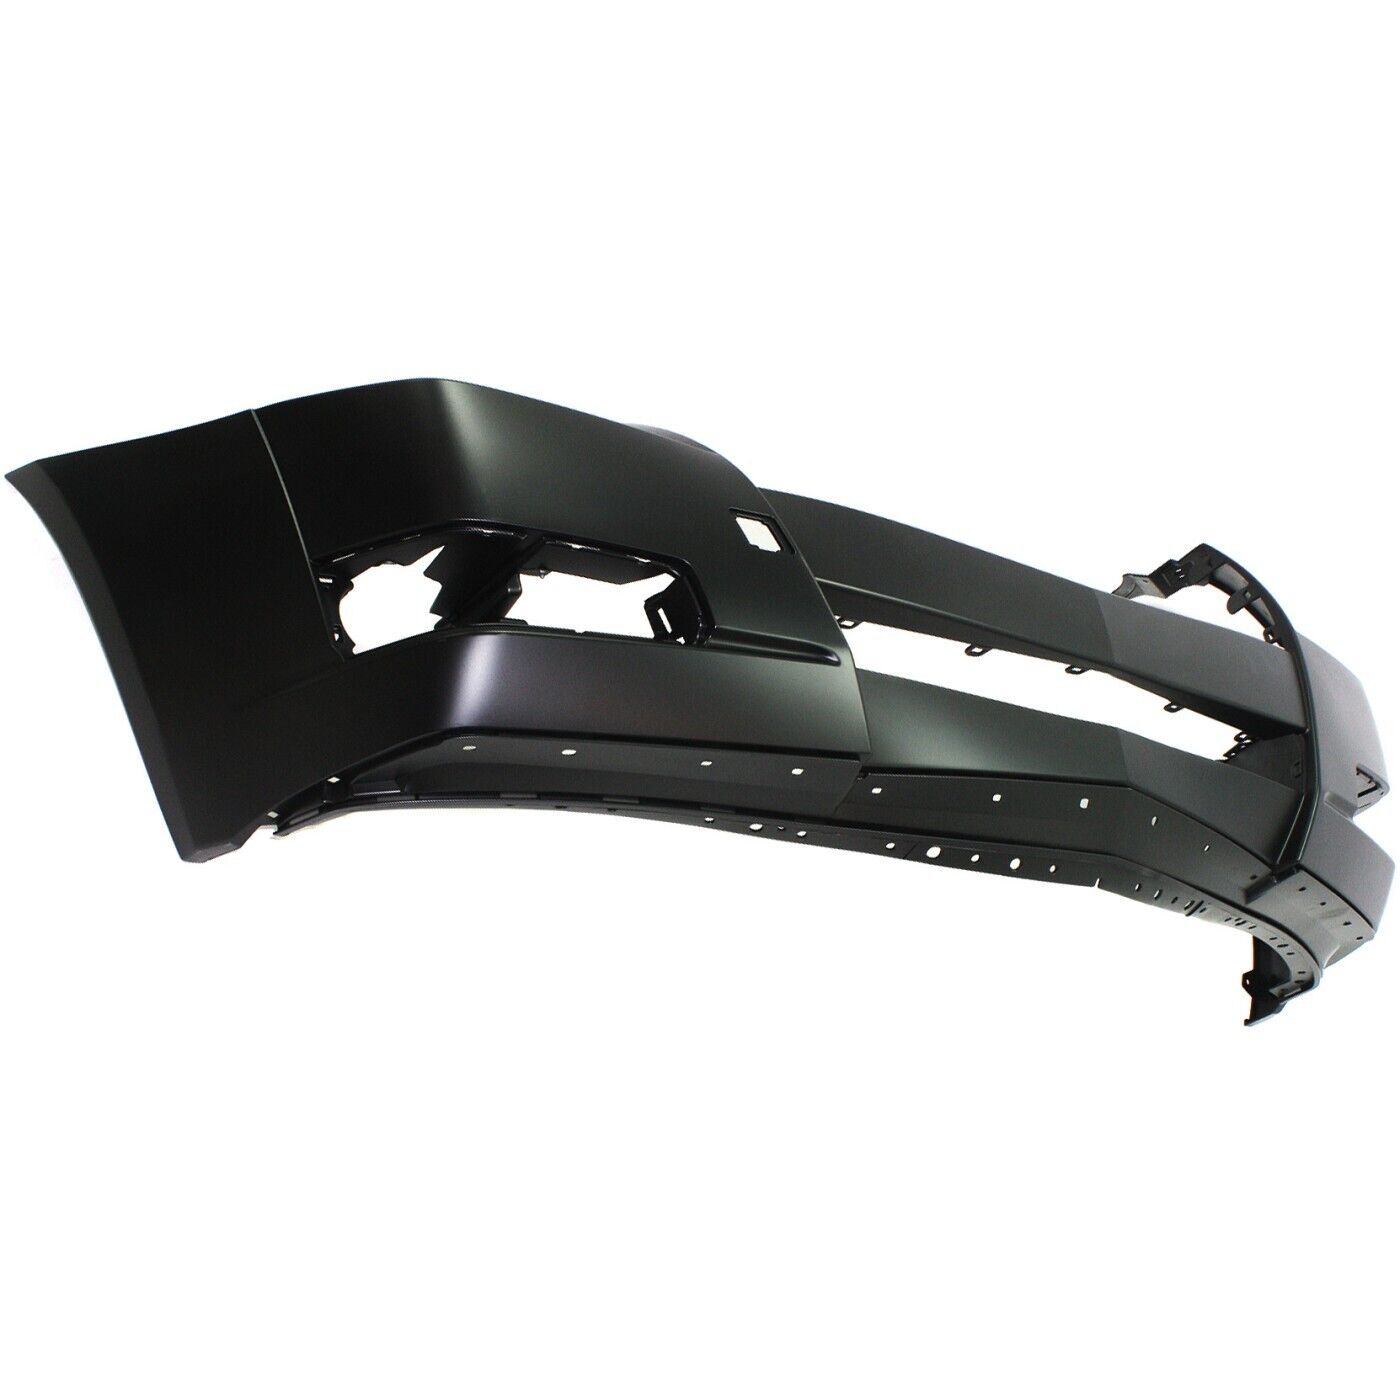 Cadillac CTS 2008 - 2014 Front Bumper Cover 08 - 14 GM1000856 Bumper-King